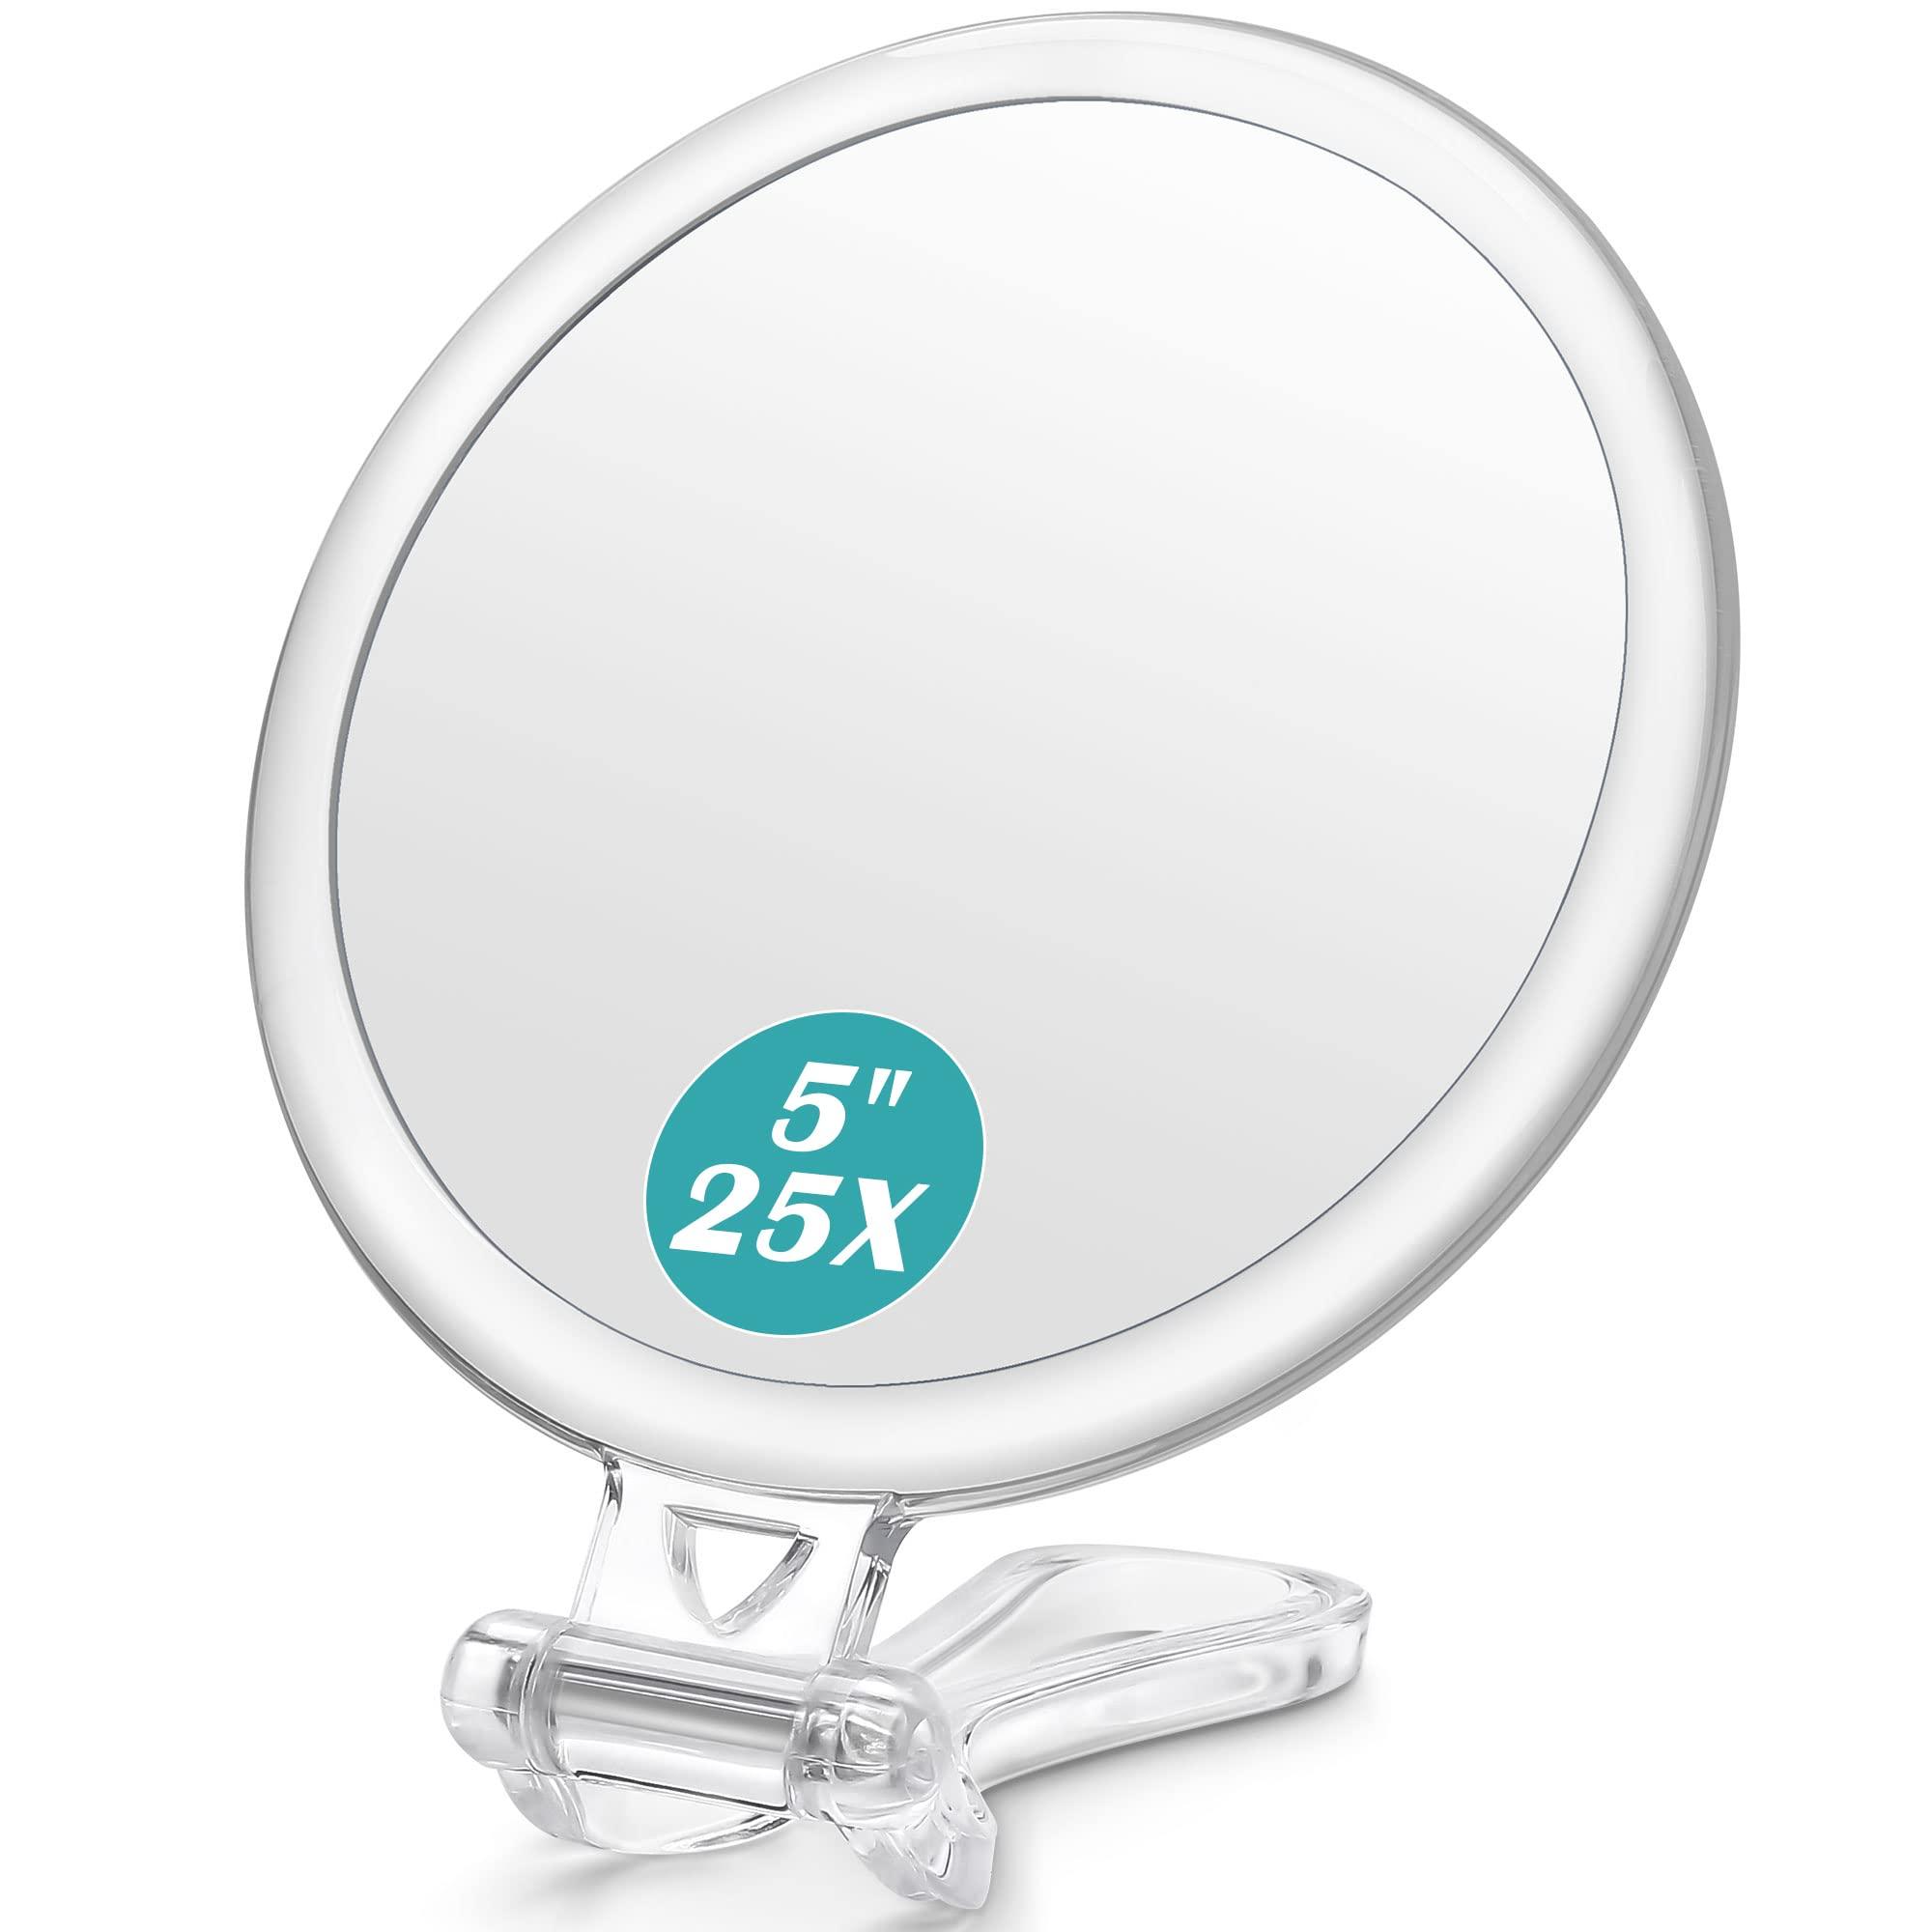 B Beauty Planet Hand Mirror, 25X/1X Double-Sided Hand Held Magnified Mirror & 10X Magnifying Mirror Suction Cup,Perfect for Precise Makeup Applications 0